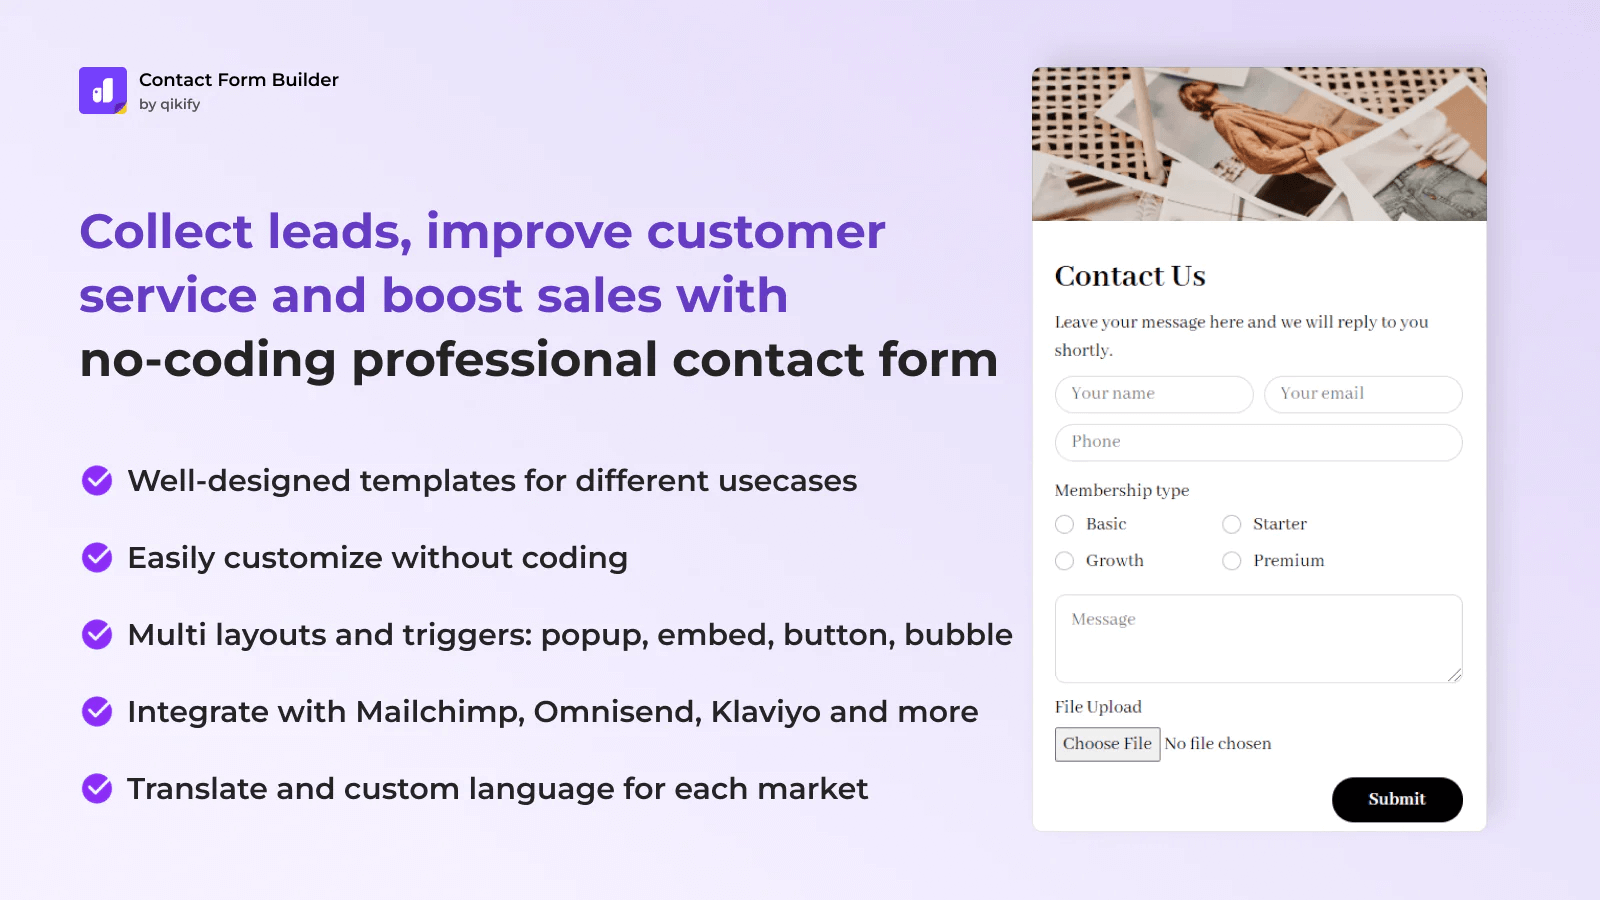 qikify Contact Form Builder